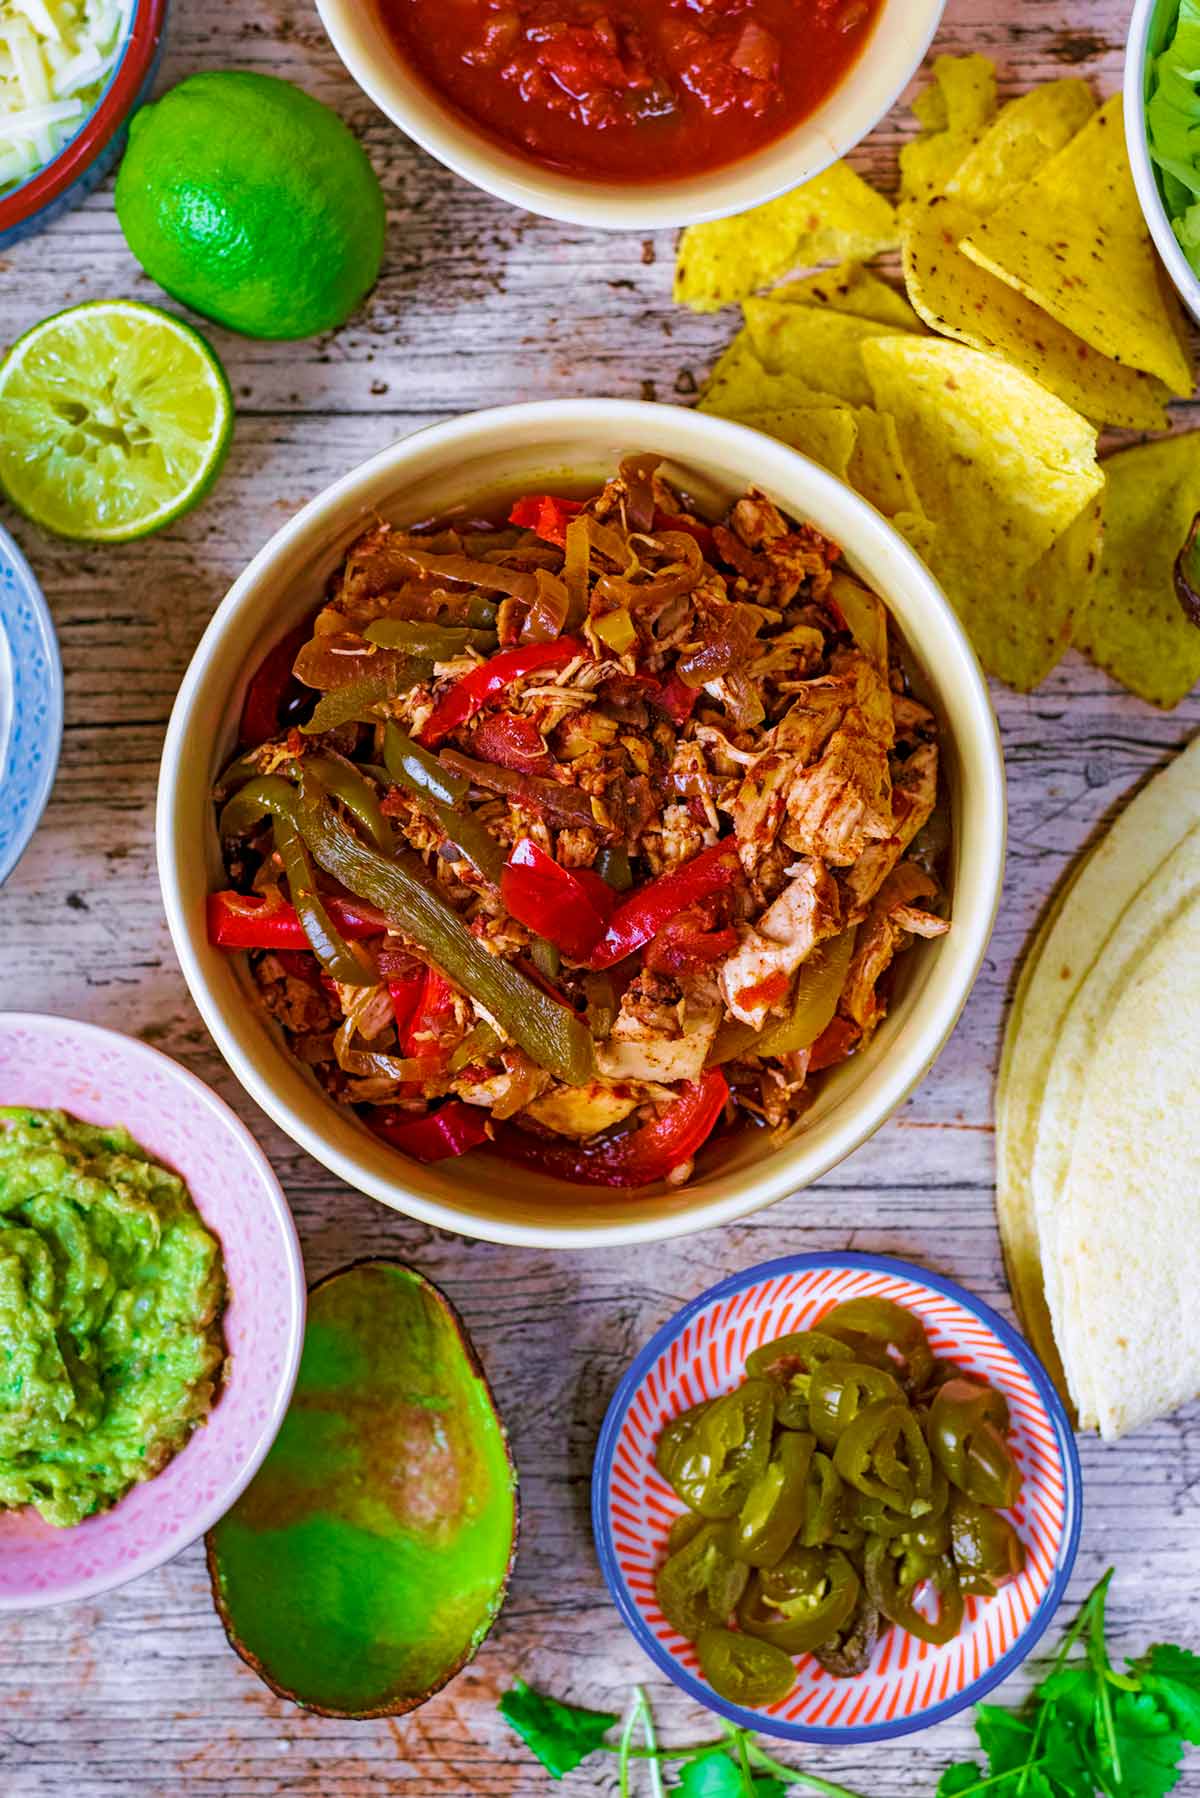 A bowl of fajita filling surrounded by salsa, guacamole, tortilla wraps, jalapenos and tortilla chips.